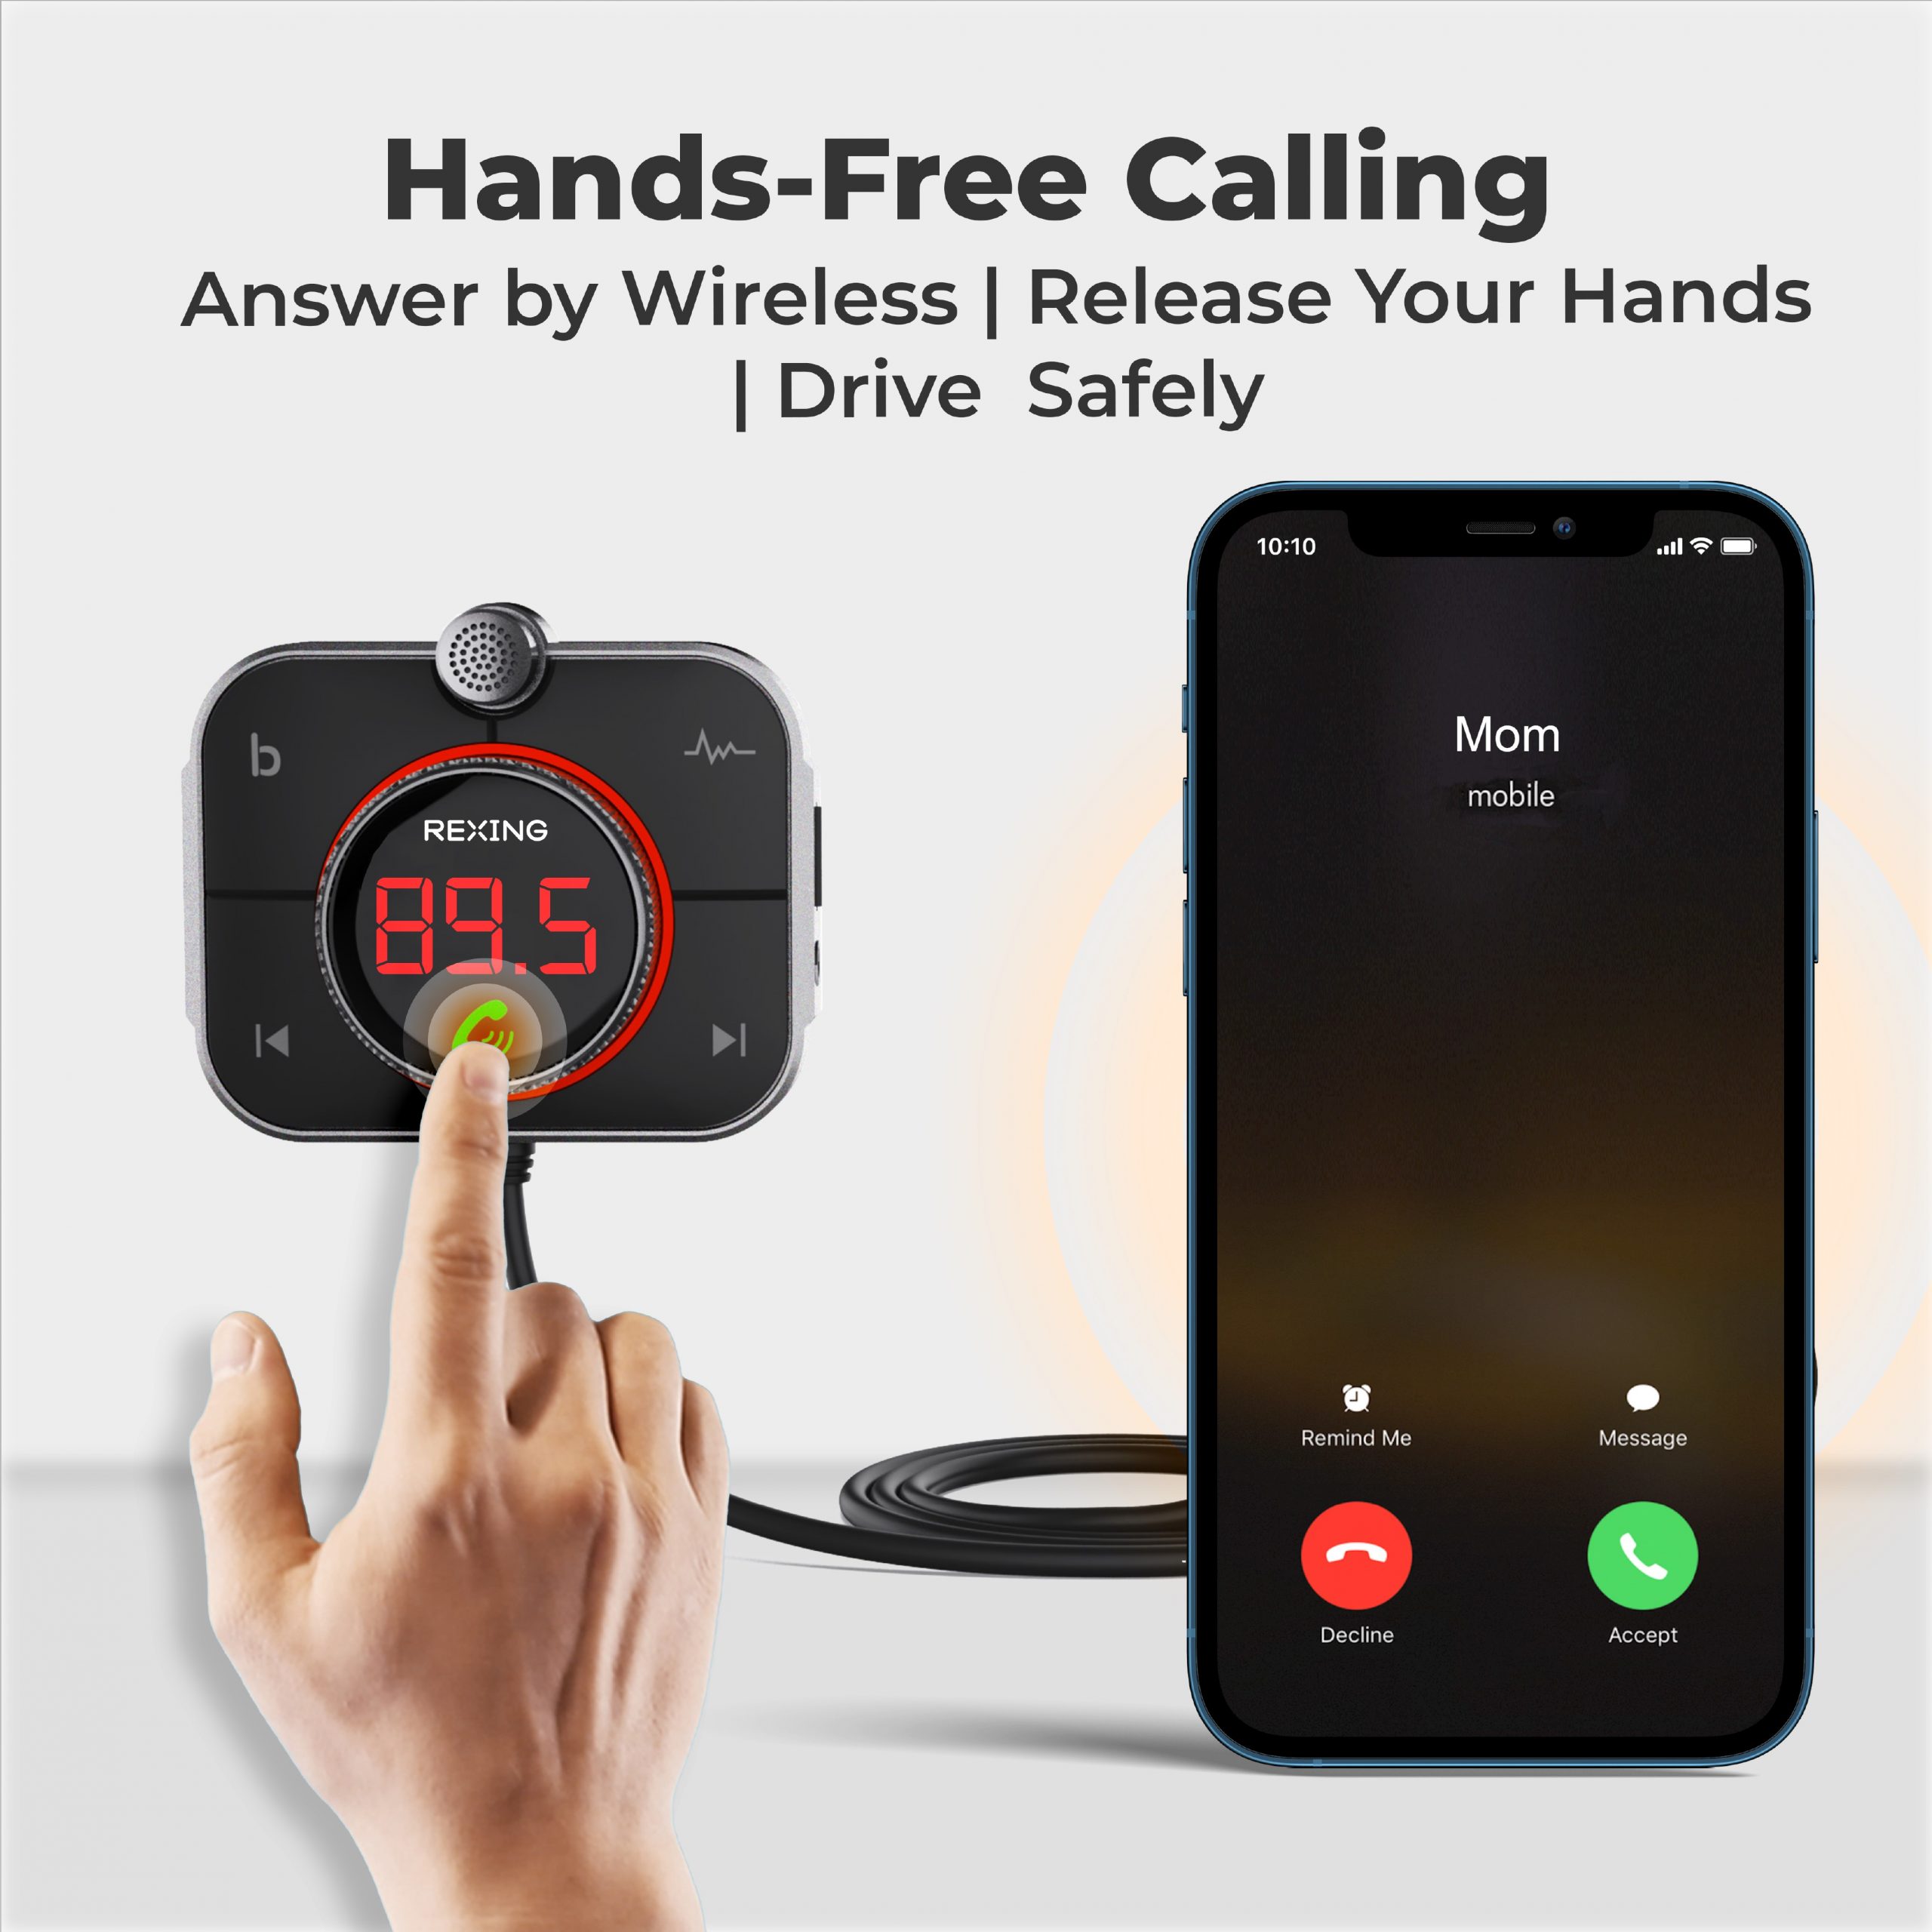 REXING AUXB0 Mini Portable Bluetooth Transmitter for cars Bluetooth 5.1